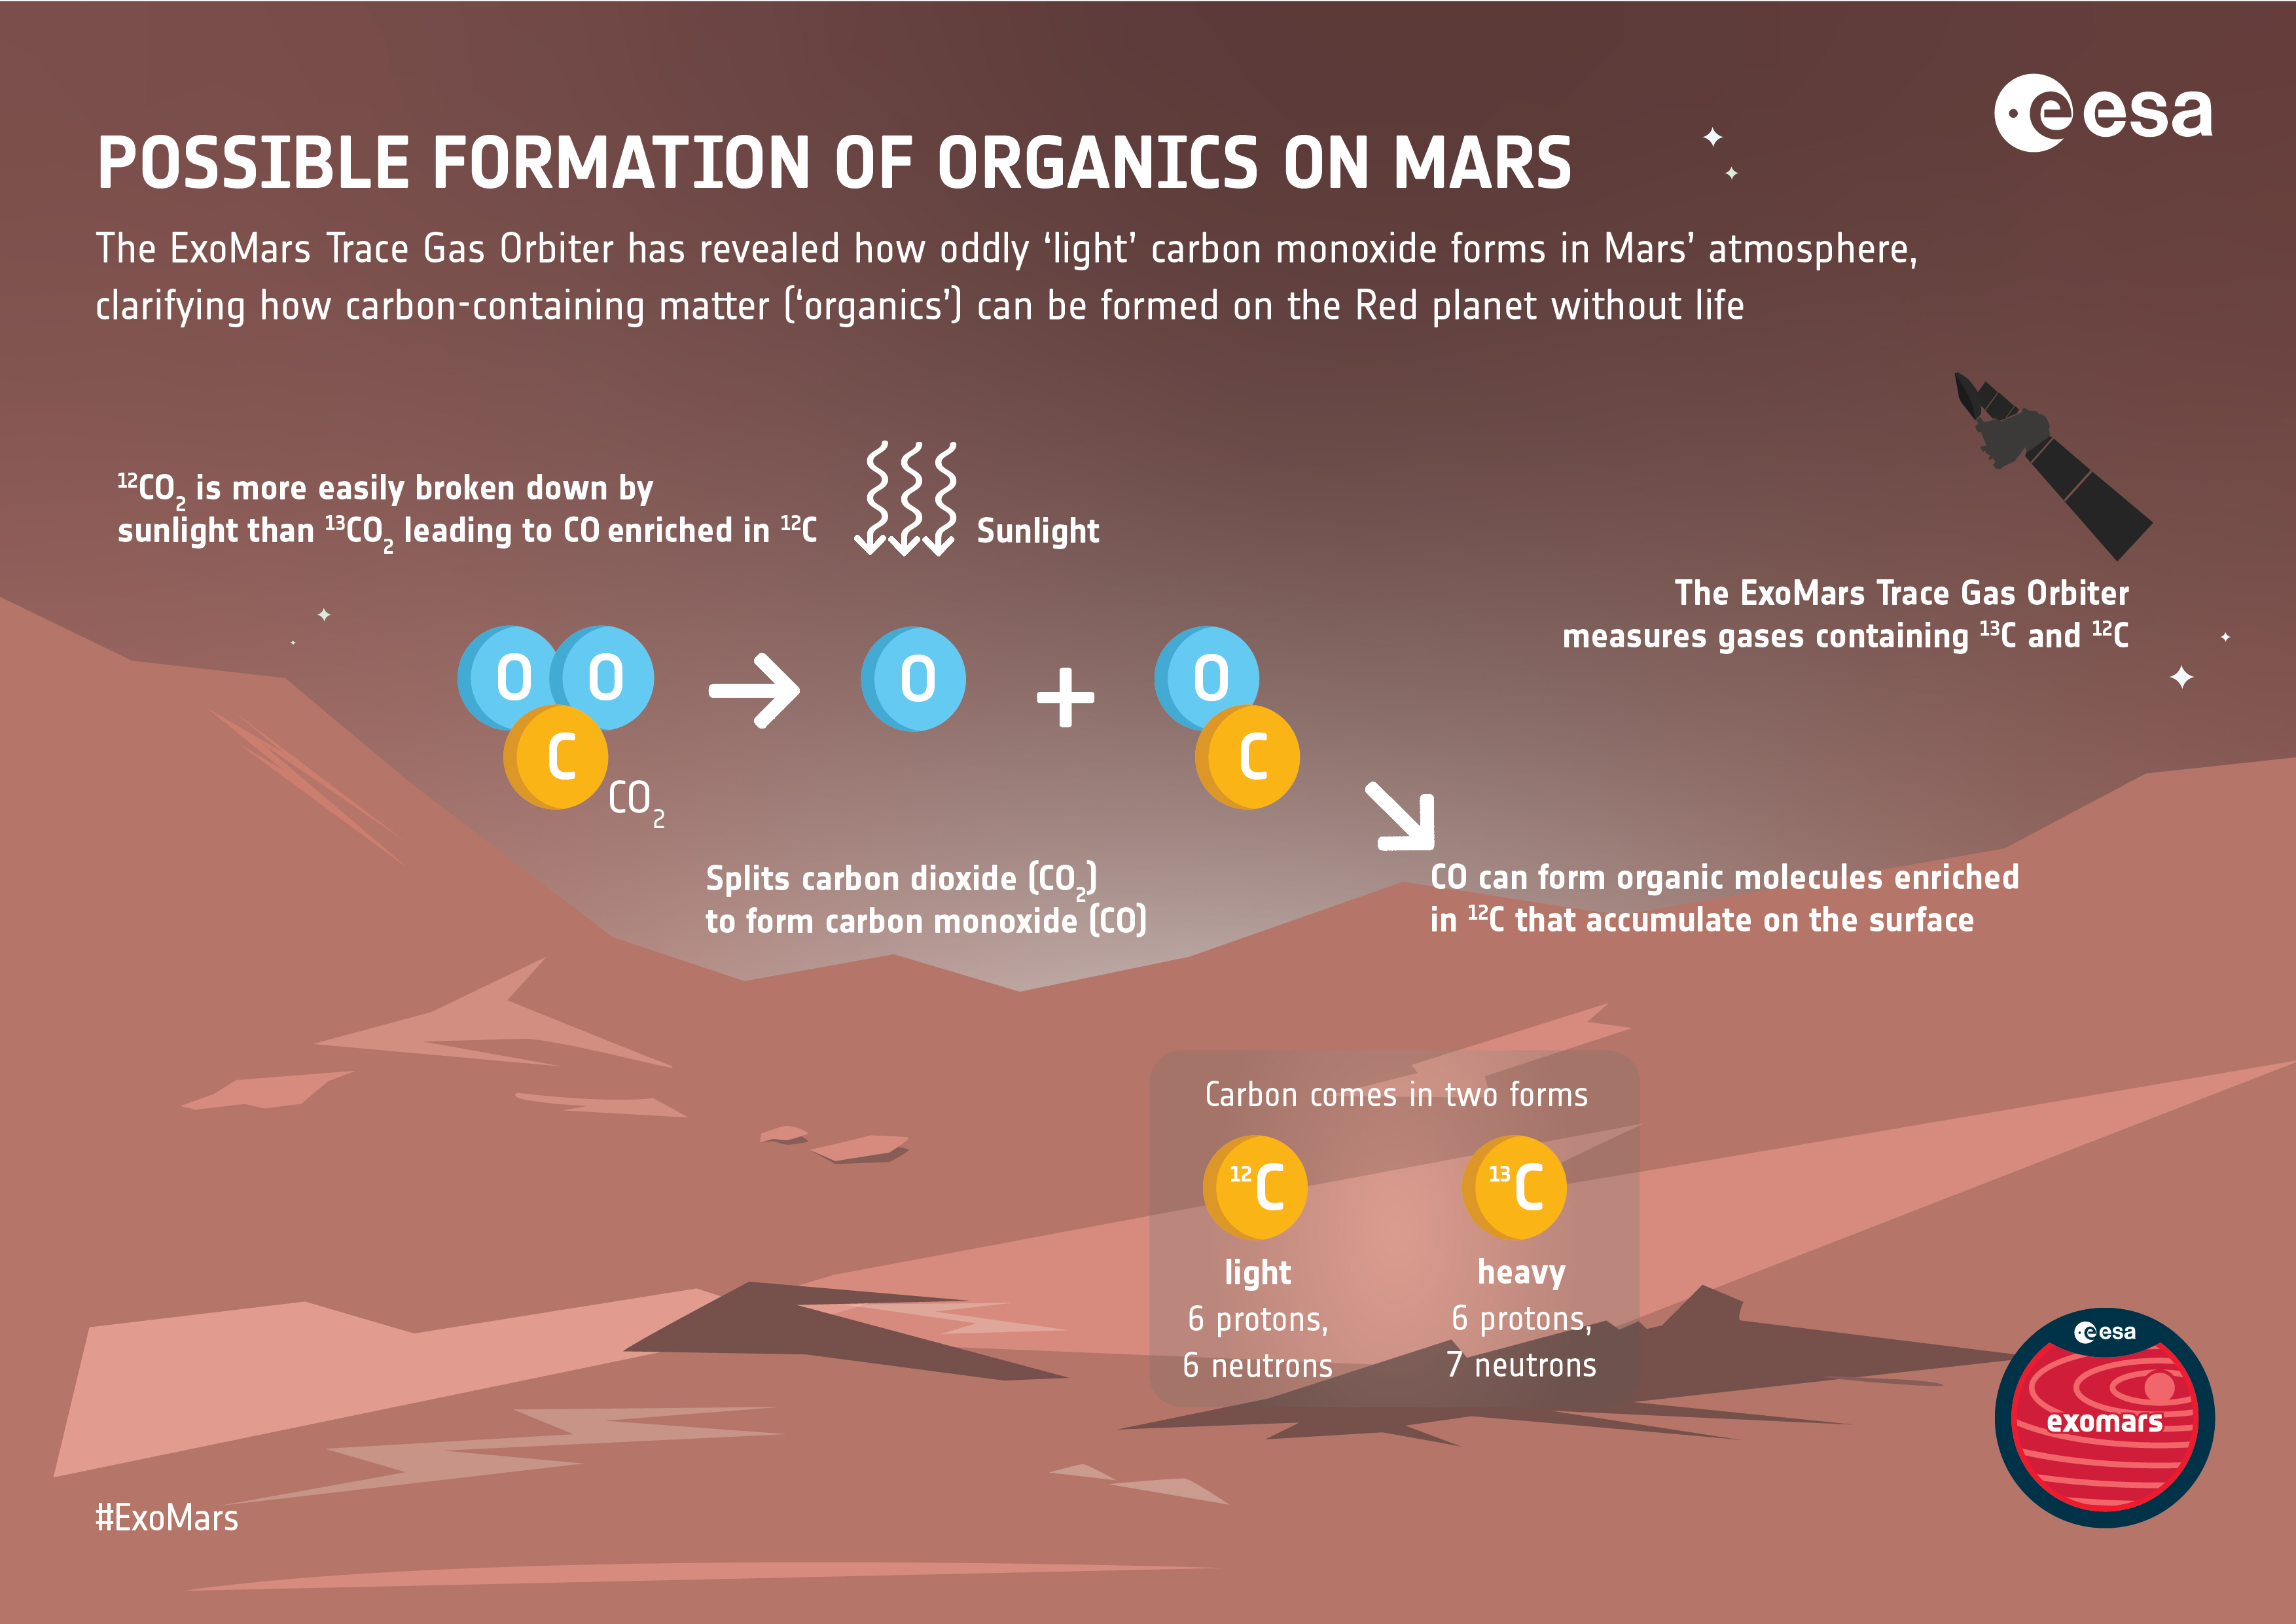 Possible formation of organics on Mars